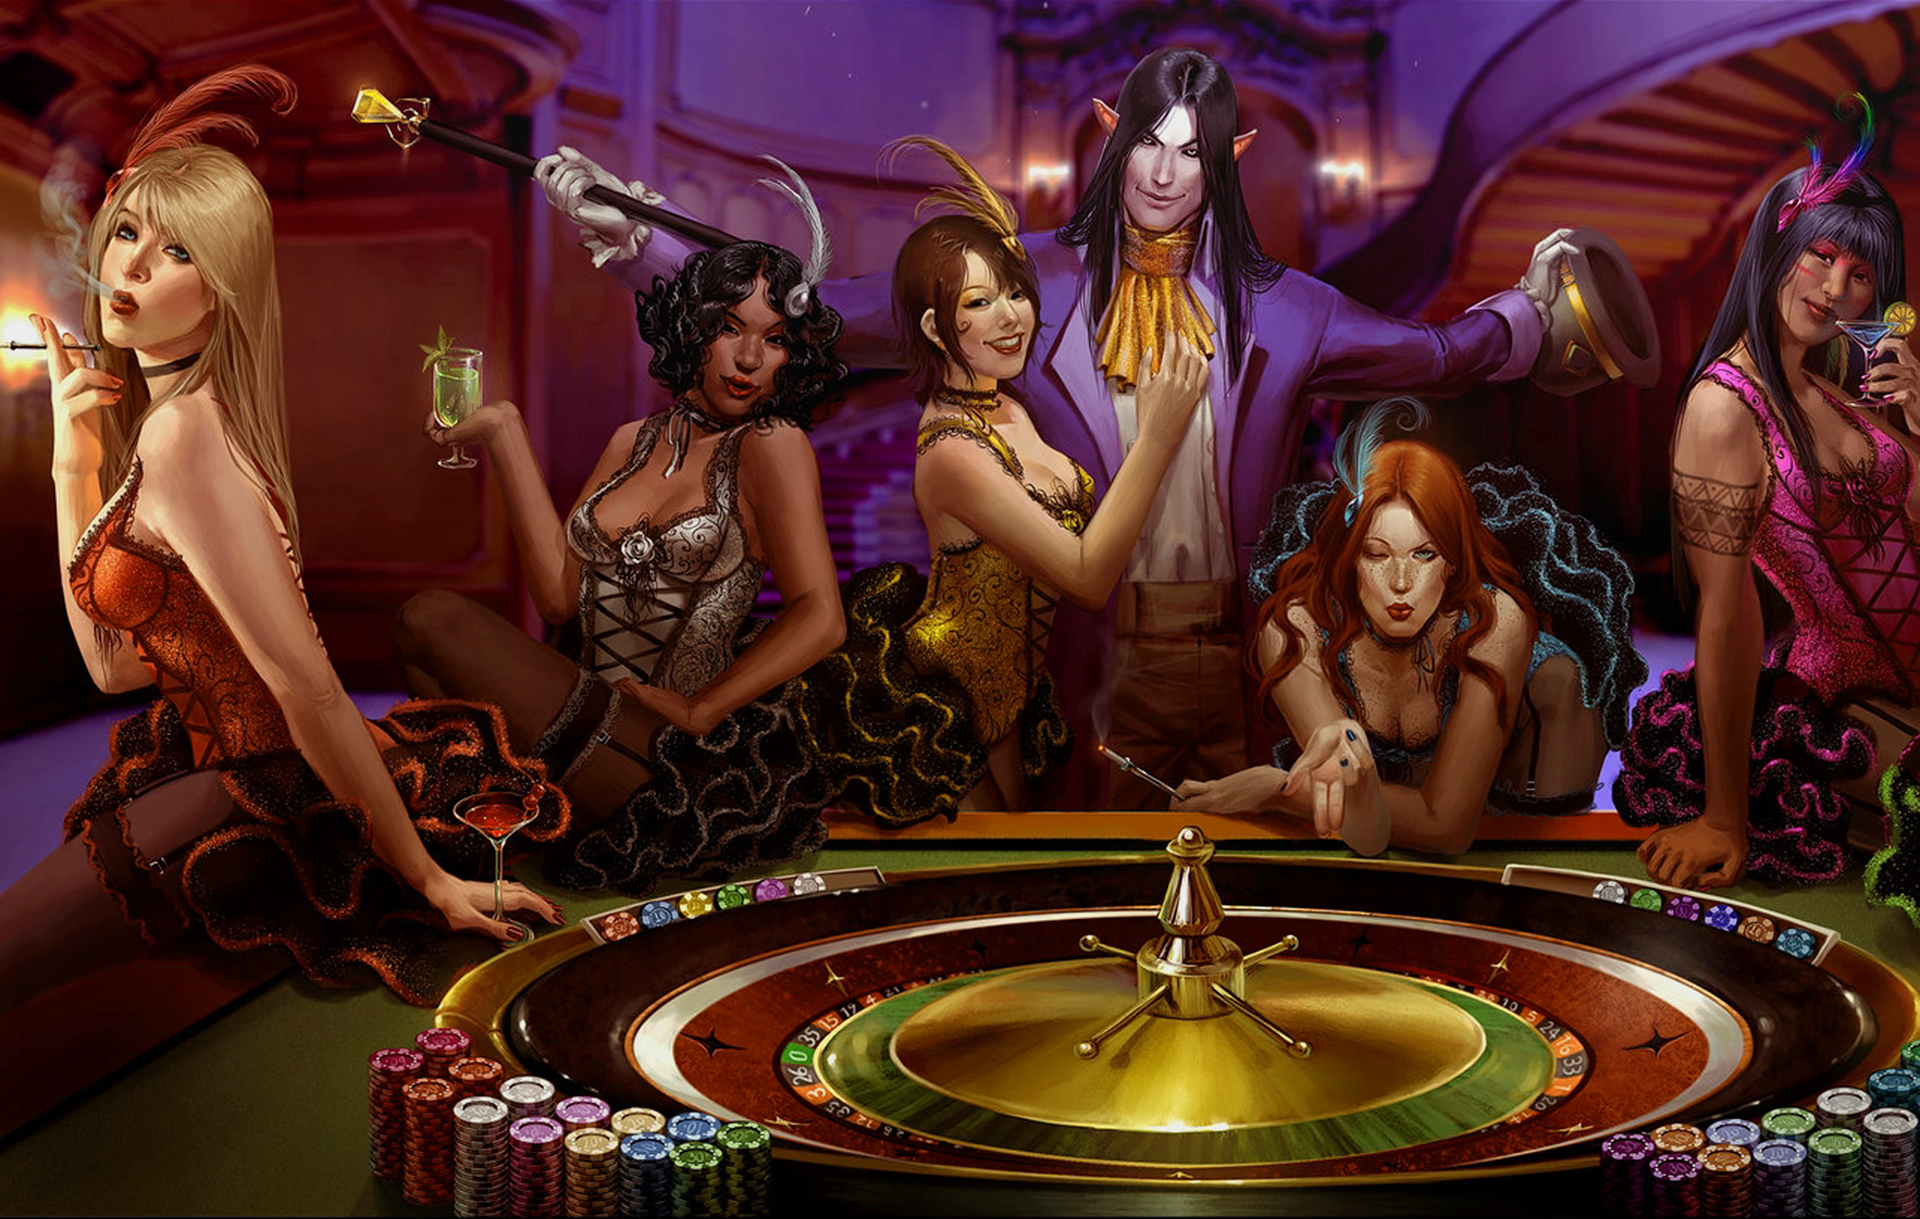 Wallpapers chips girls roulette on the desktop